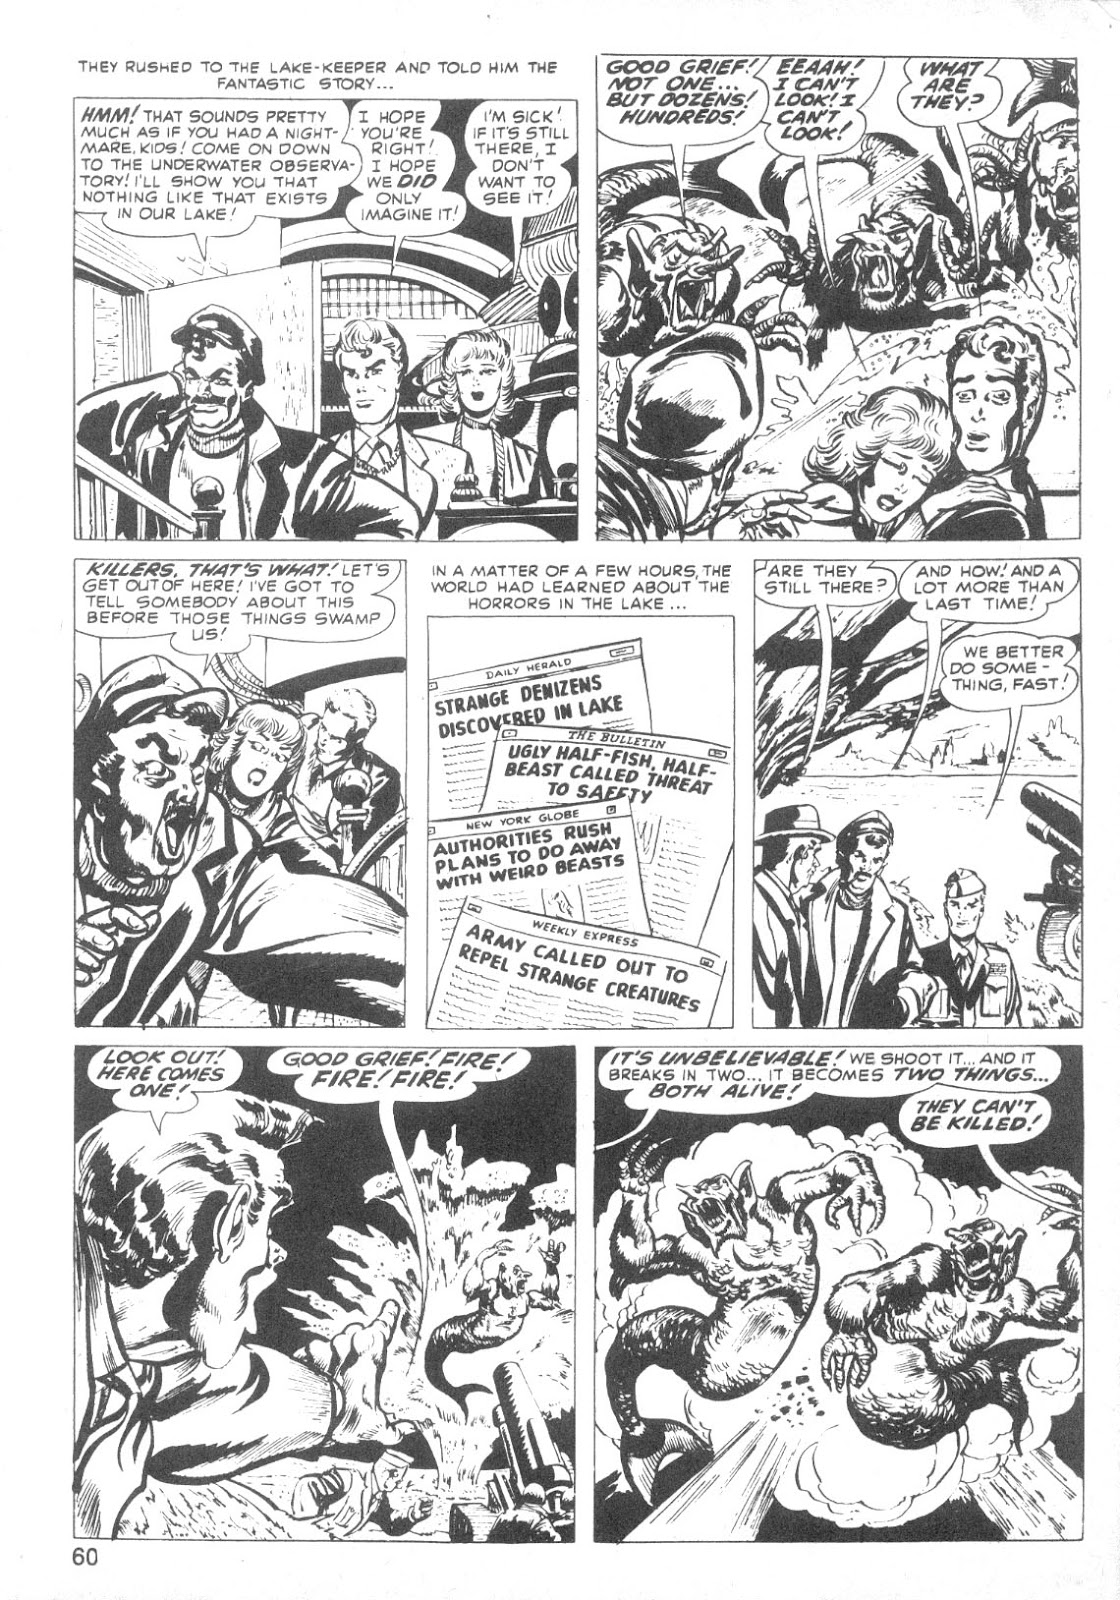 Monsters Unleashed (1973) issue 4 - Page 60